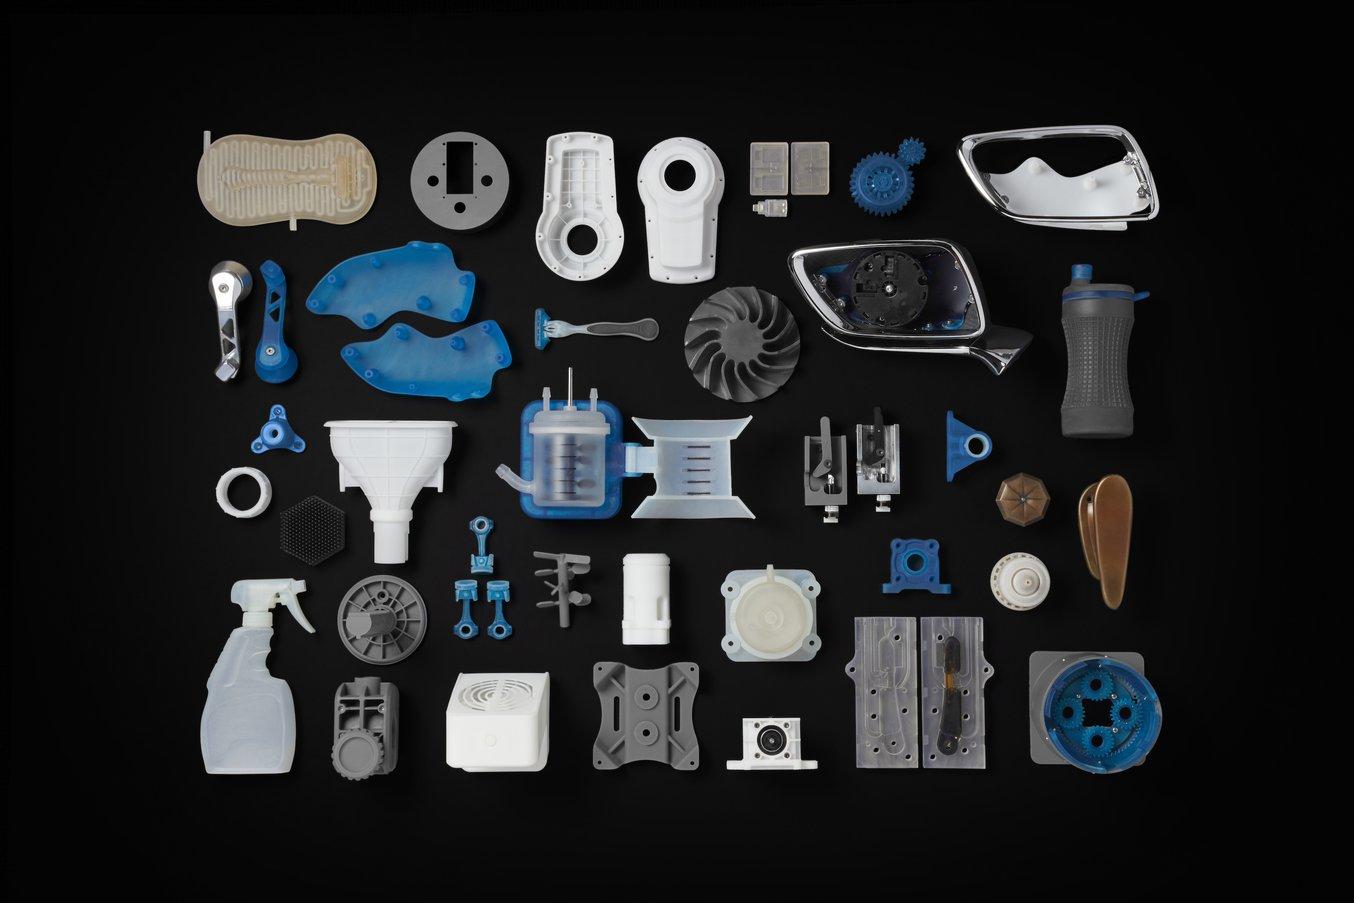 Resin 3D printers offer a variety of materials for a wide range of applications.